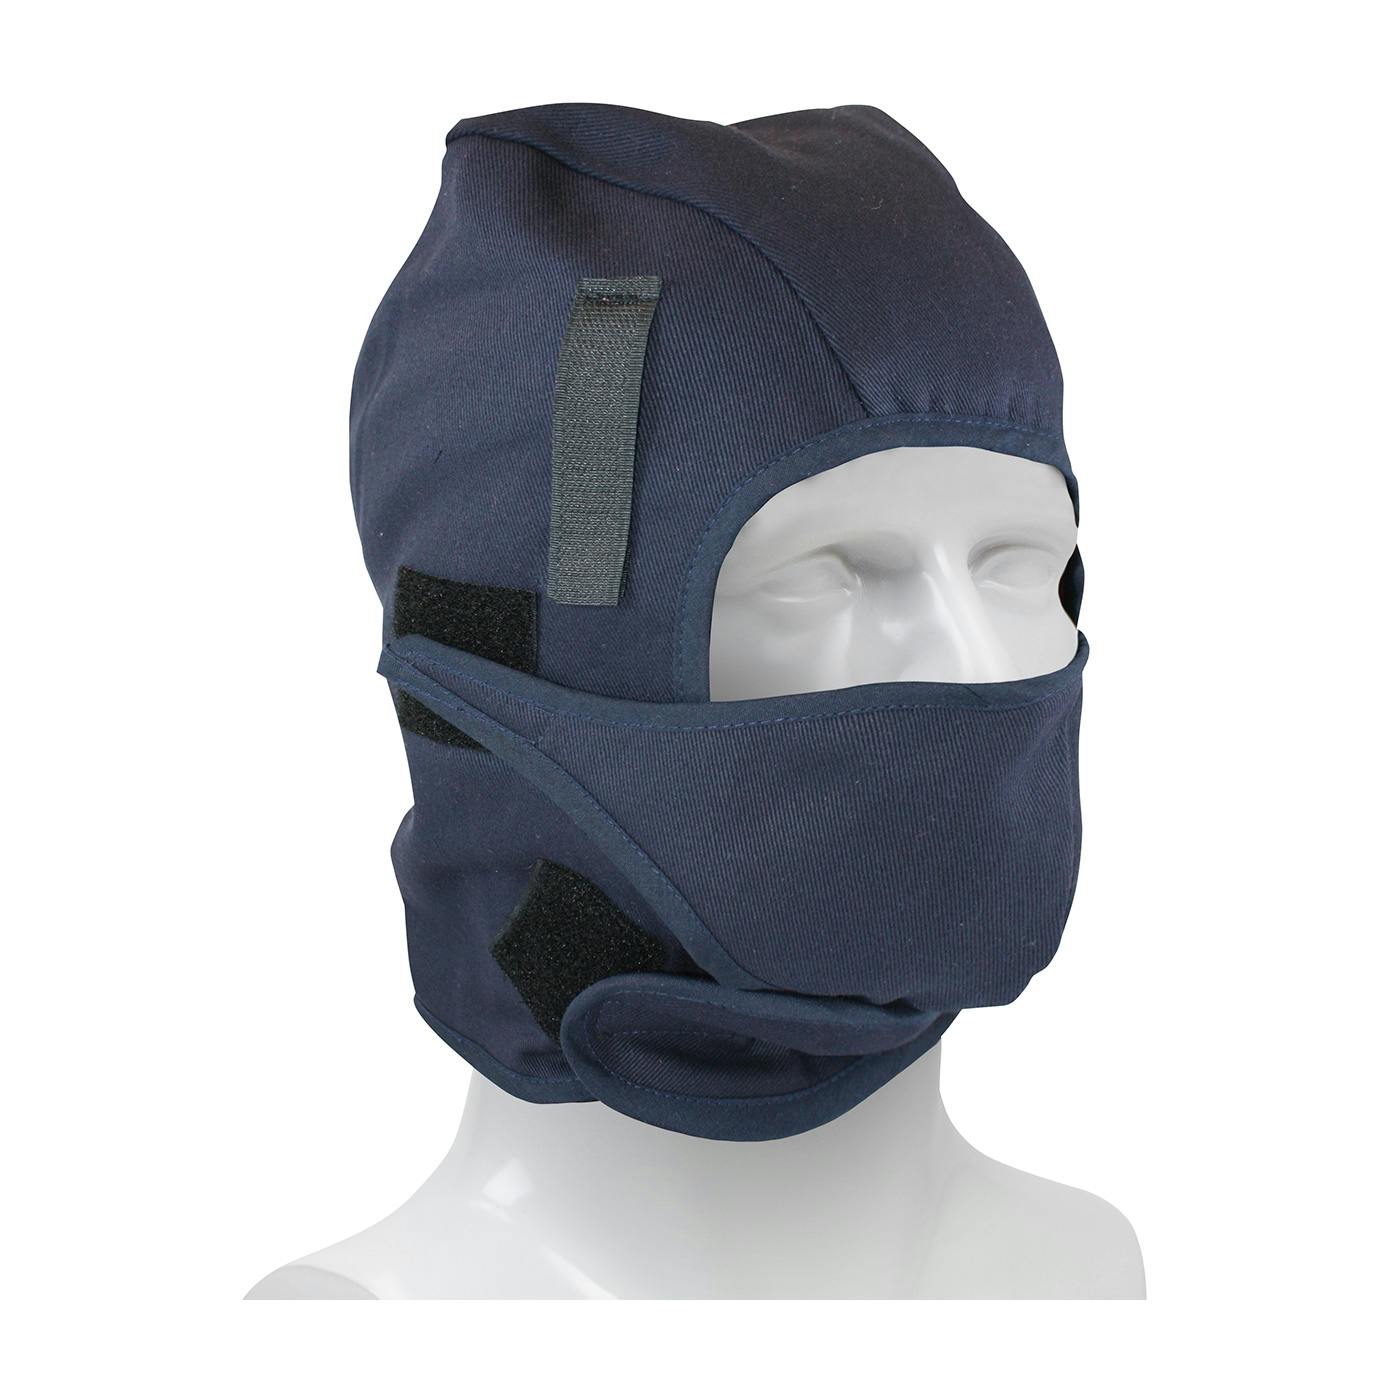 2-Layer Cotton Twill / Fleece Winter Liner with Mouthpiece and FR Treated Outer Shell - Mid Length, Navy (364-ML2FMP) - OS_2